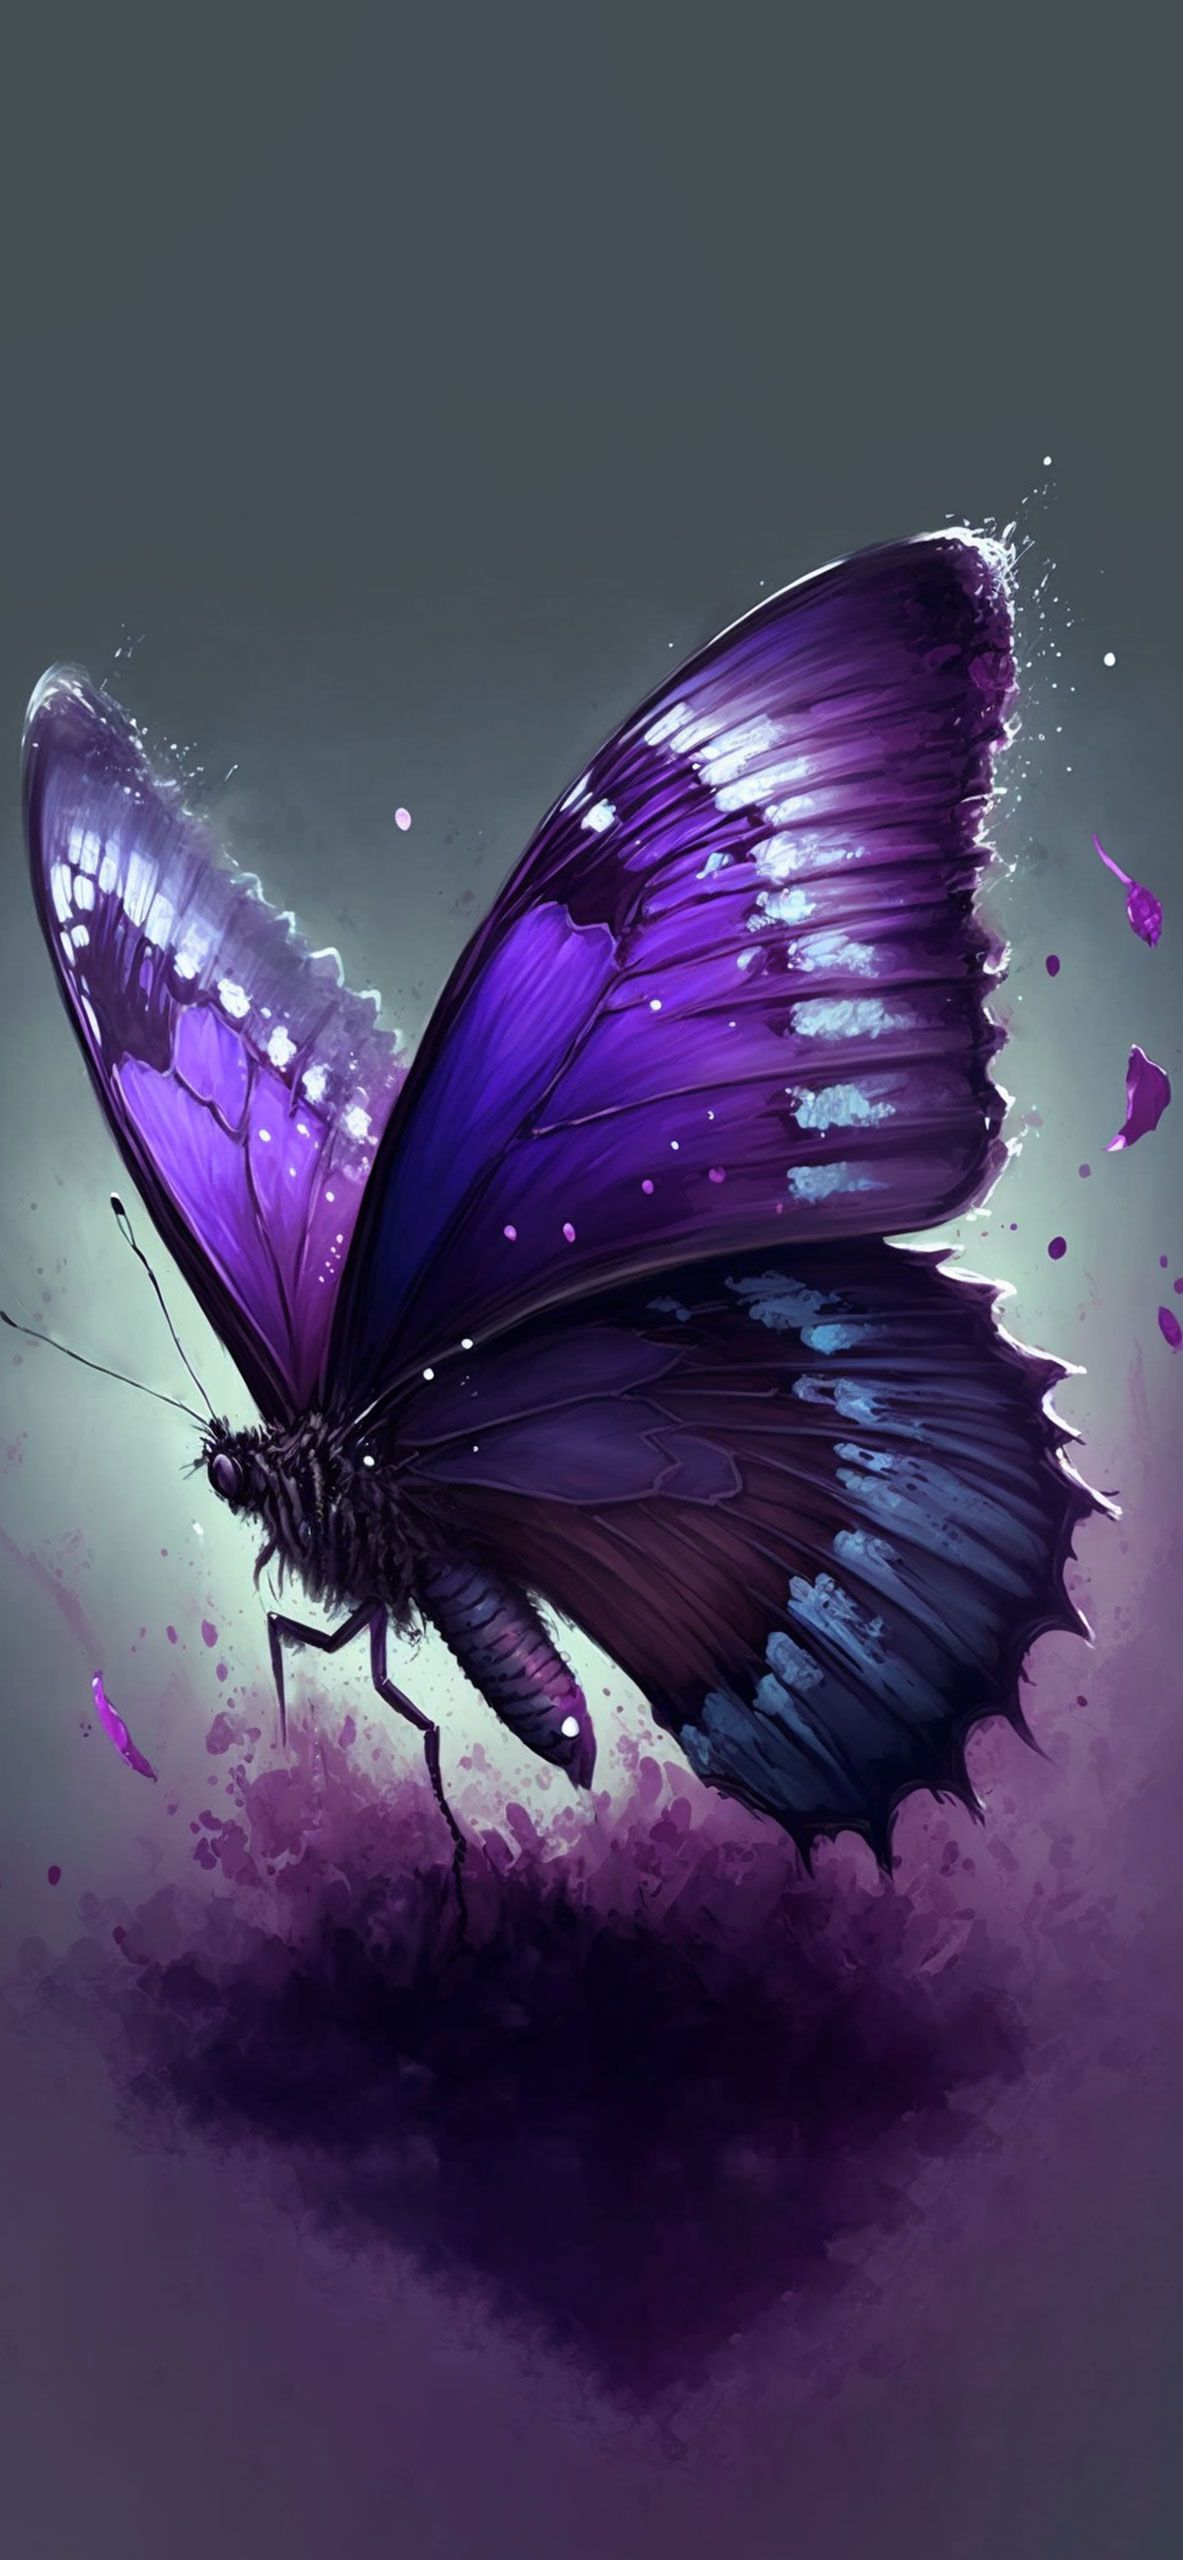 A purple butterfly wallpaper for iPhone with high-resolution 1080x1920 pixel. You can set as wallpaper for Apple iPhone X, XS Max, XR, 8, 7, 6, SE, iPad. Enjoy and share! - Butterfly